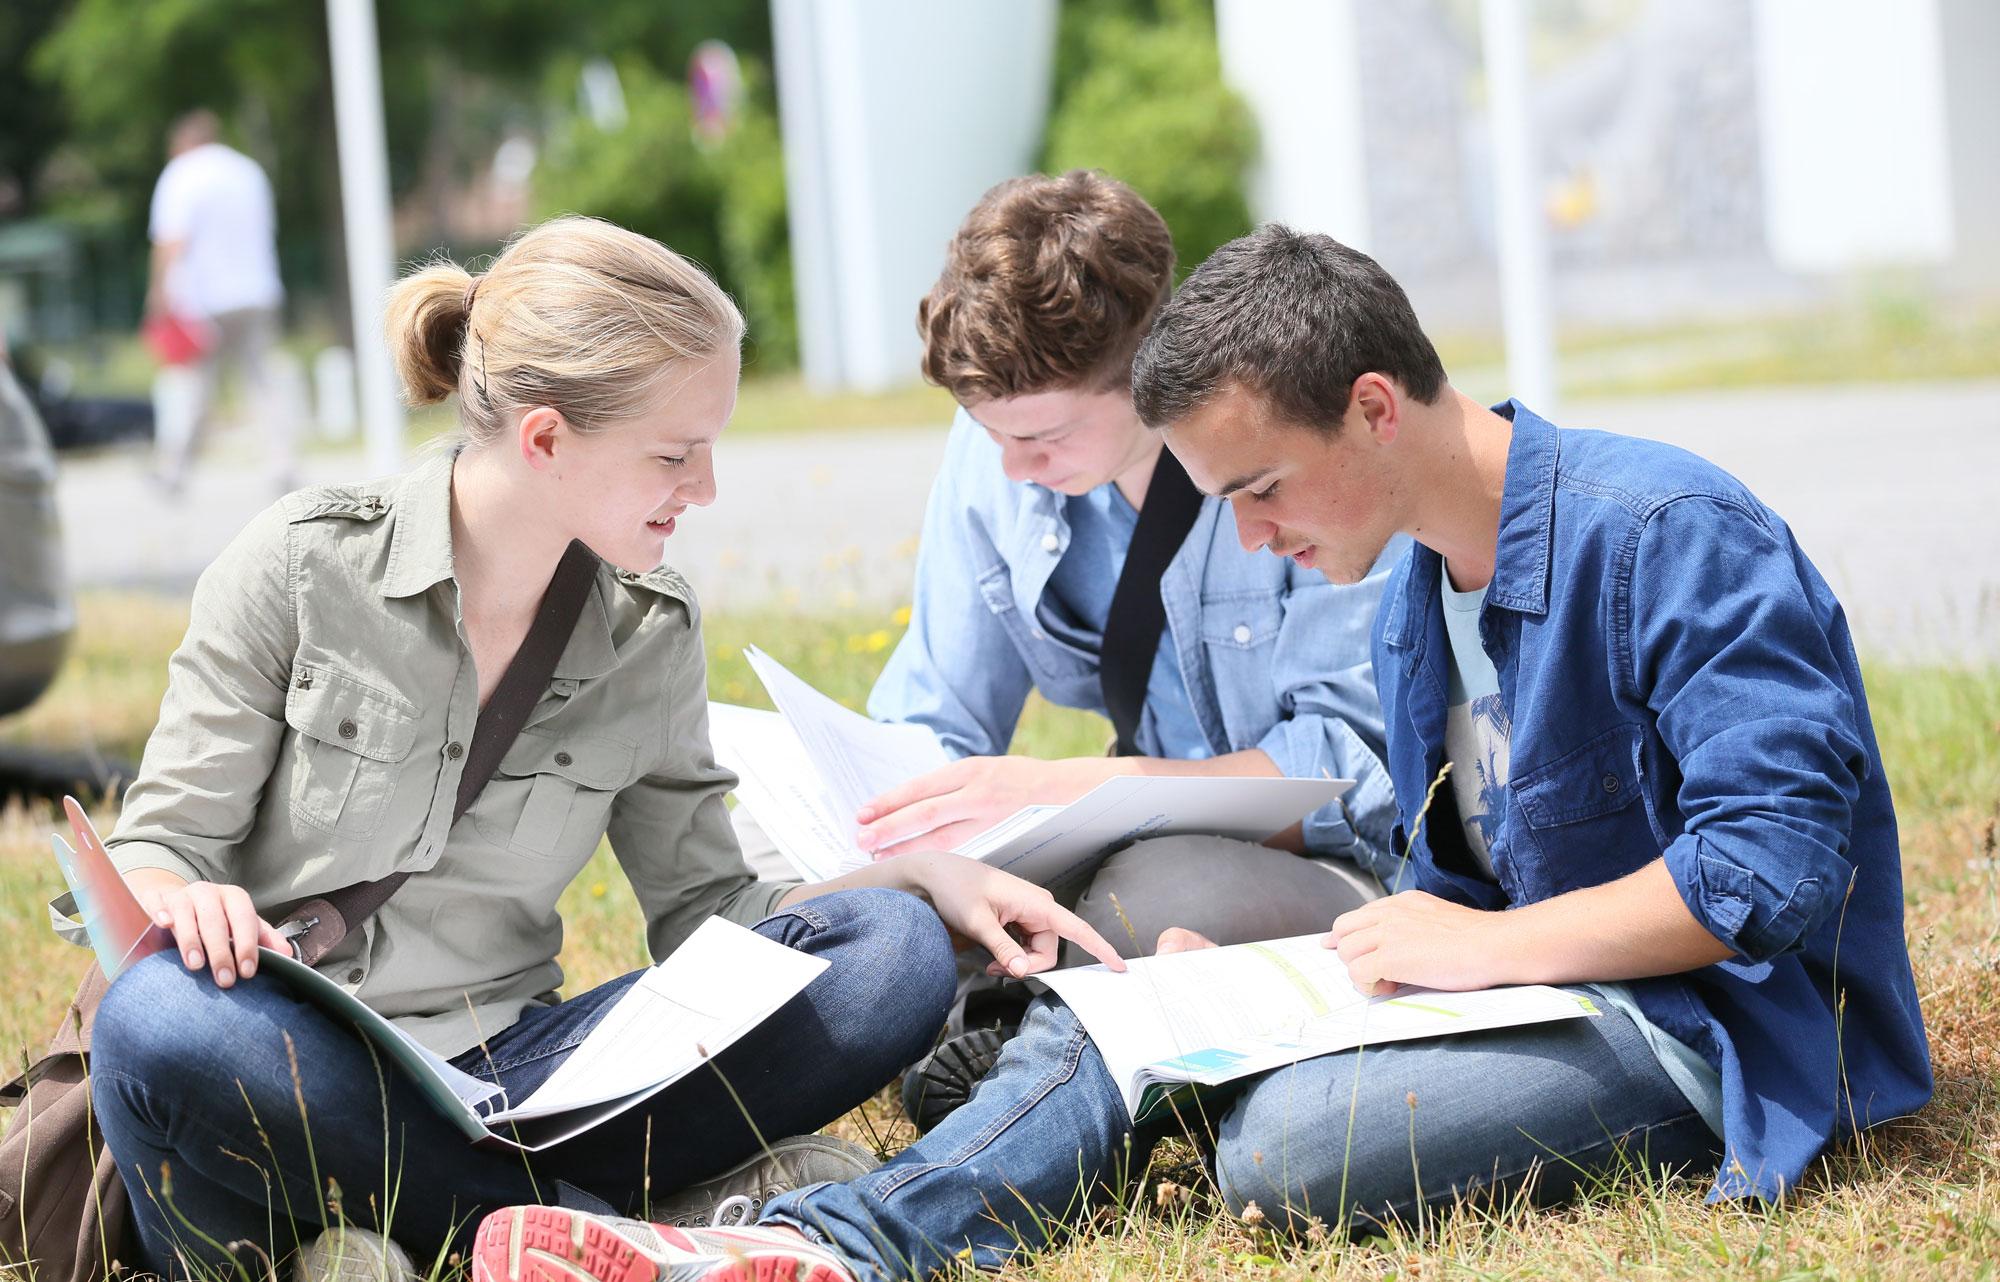 Students on a lawn studying together